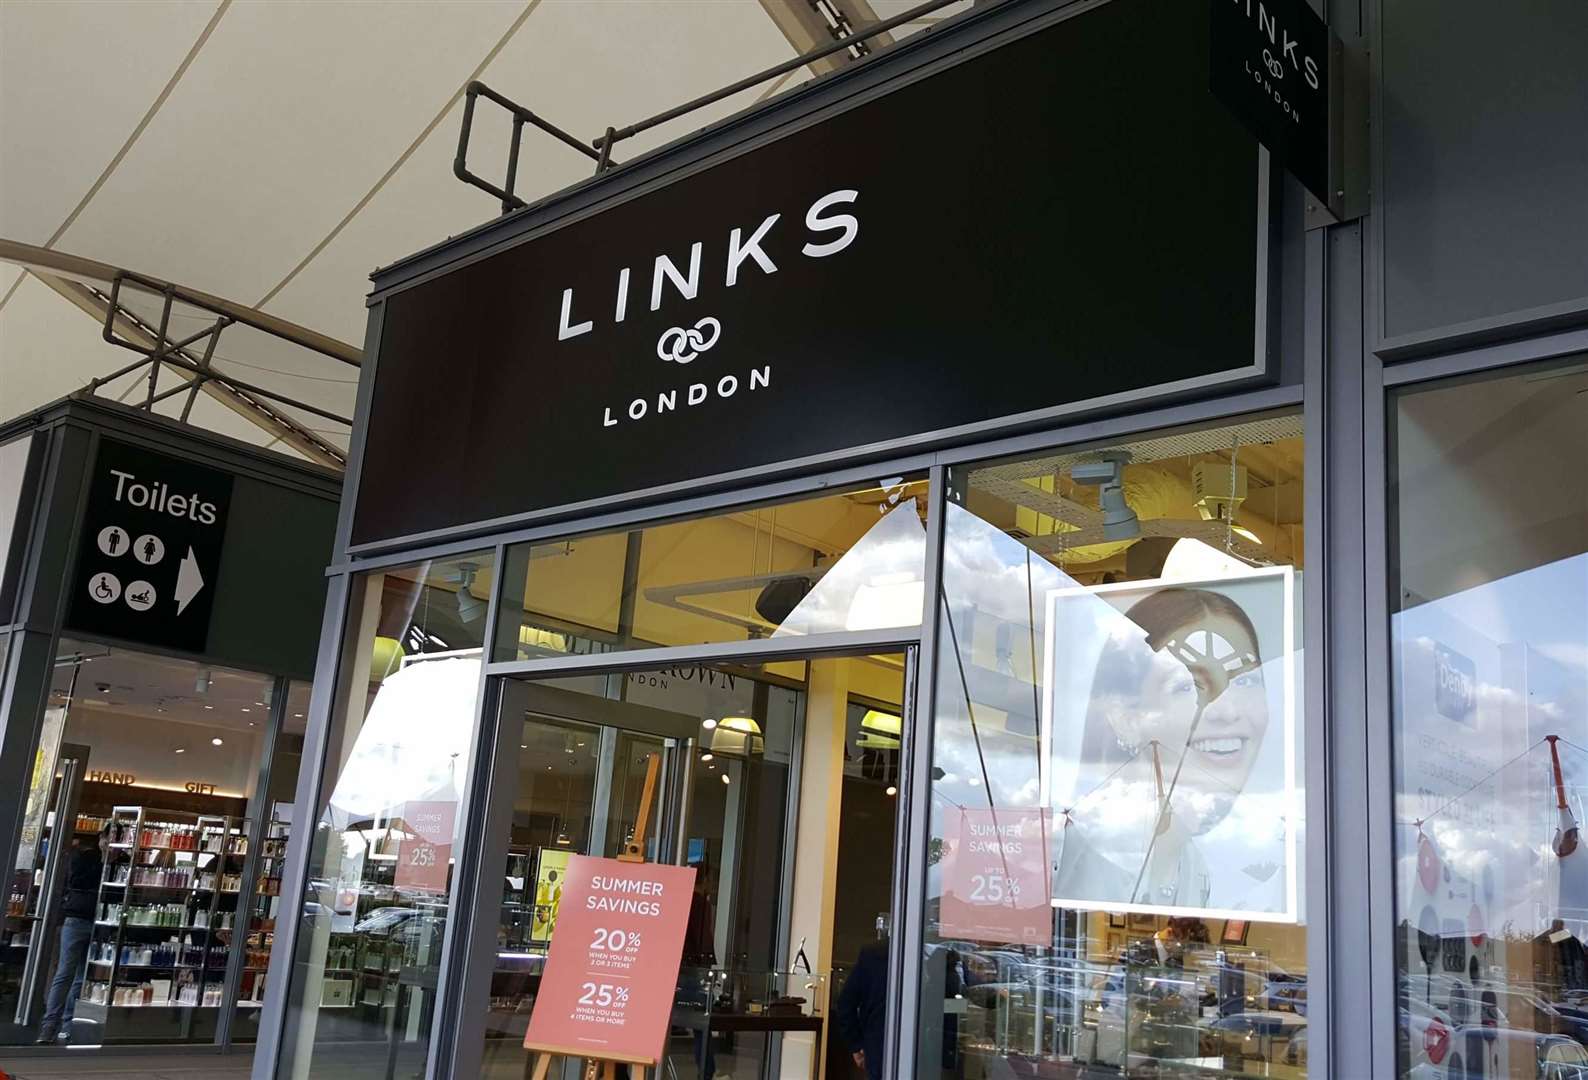 Links of London has announced an 'everything must go' sale at the Ashford Designer Outlet